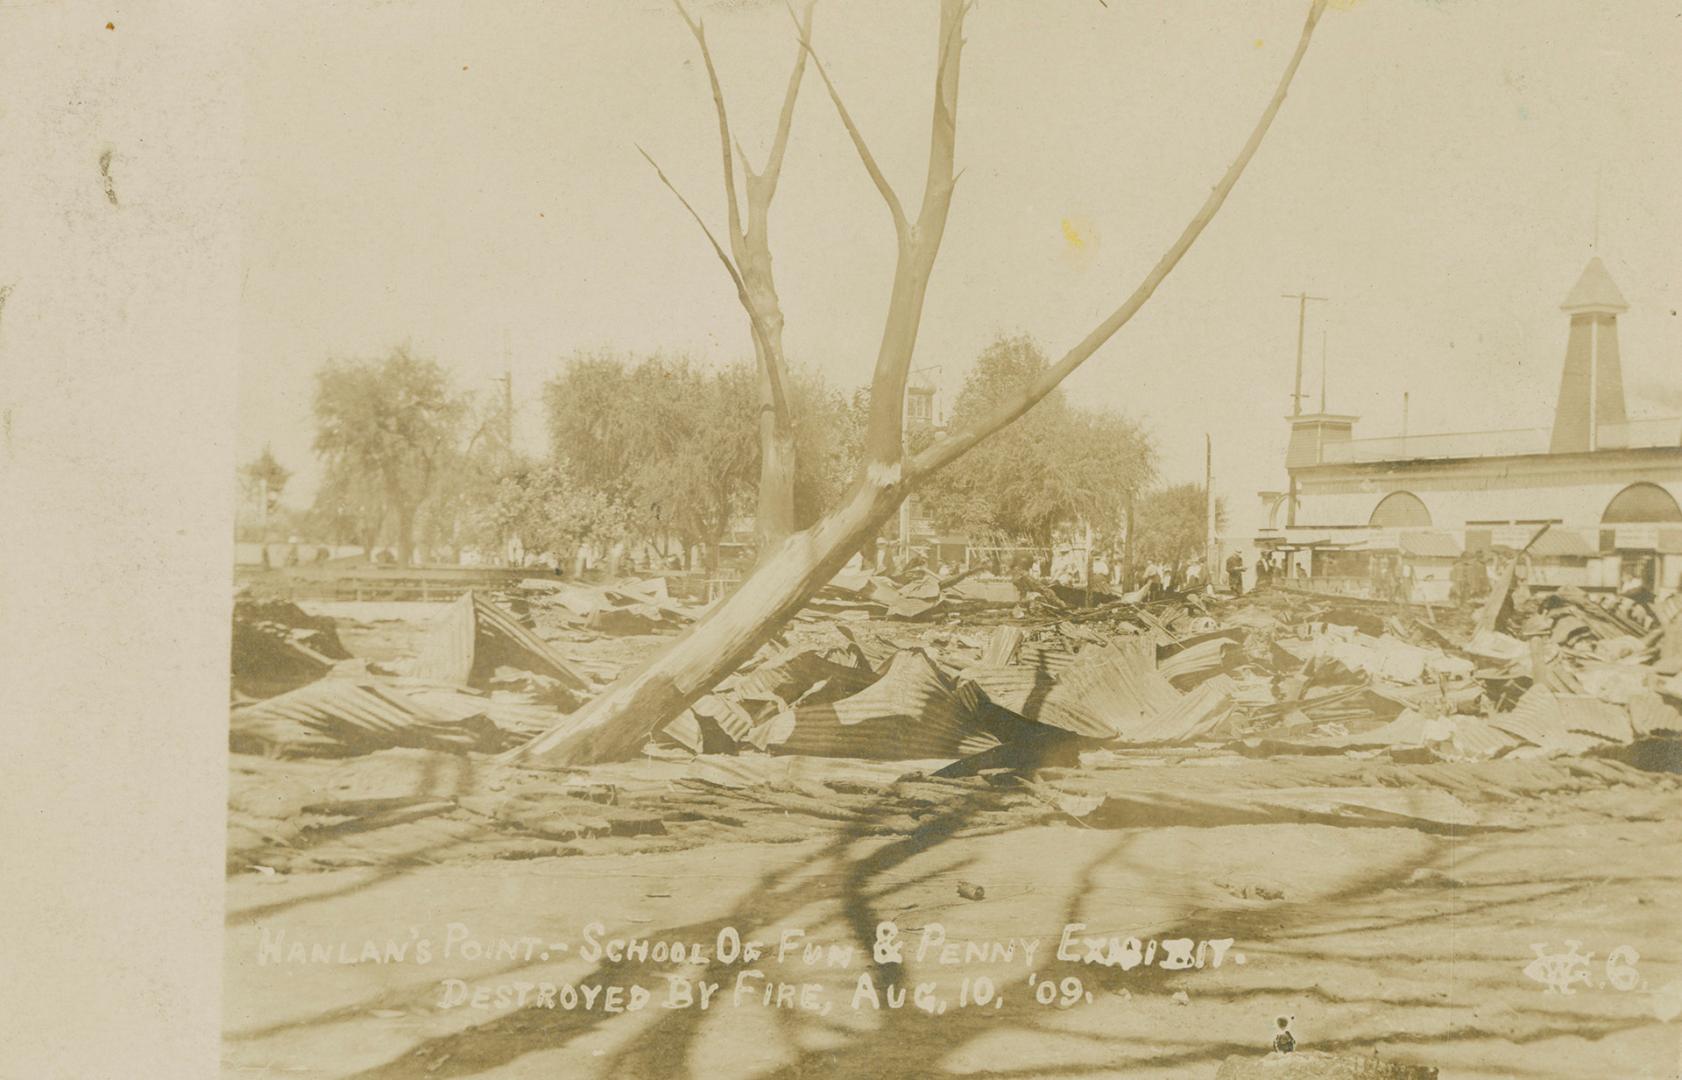 Black and white picture of an amusement park after a fire.